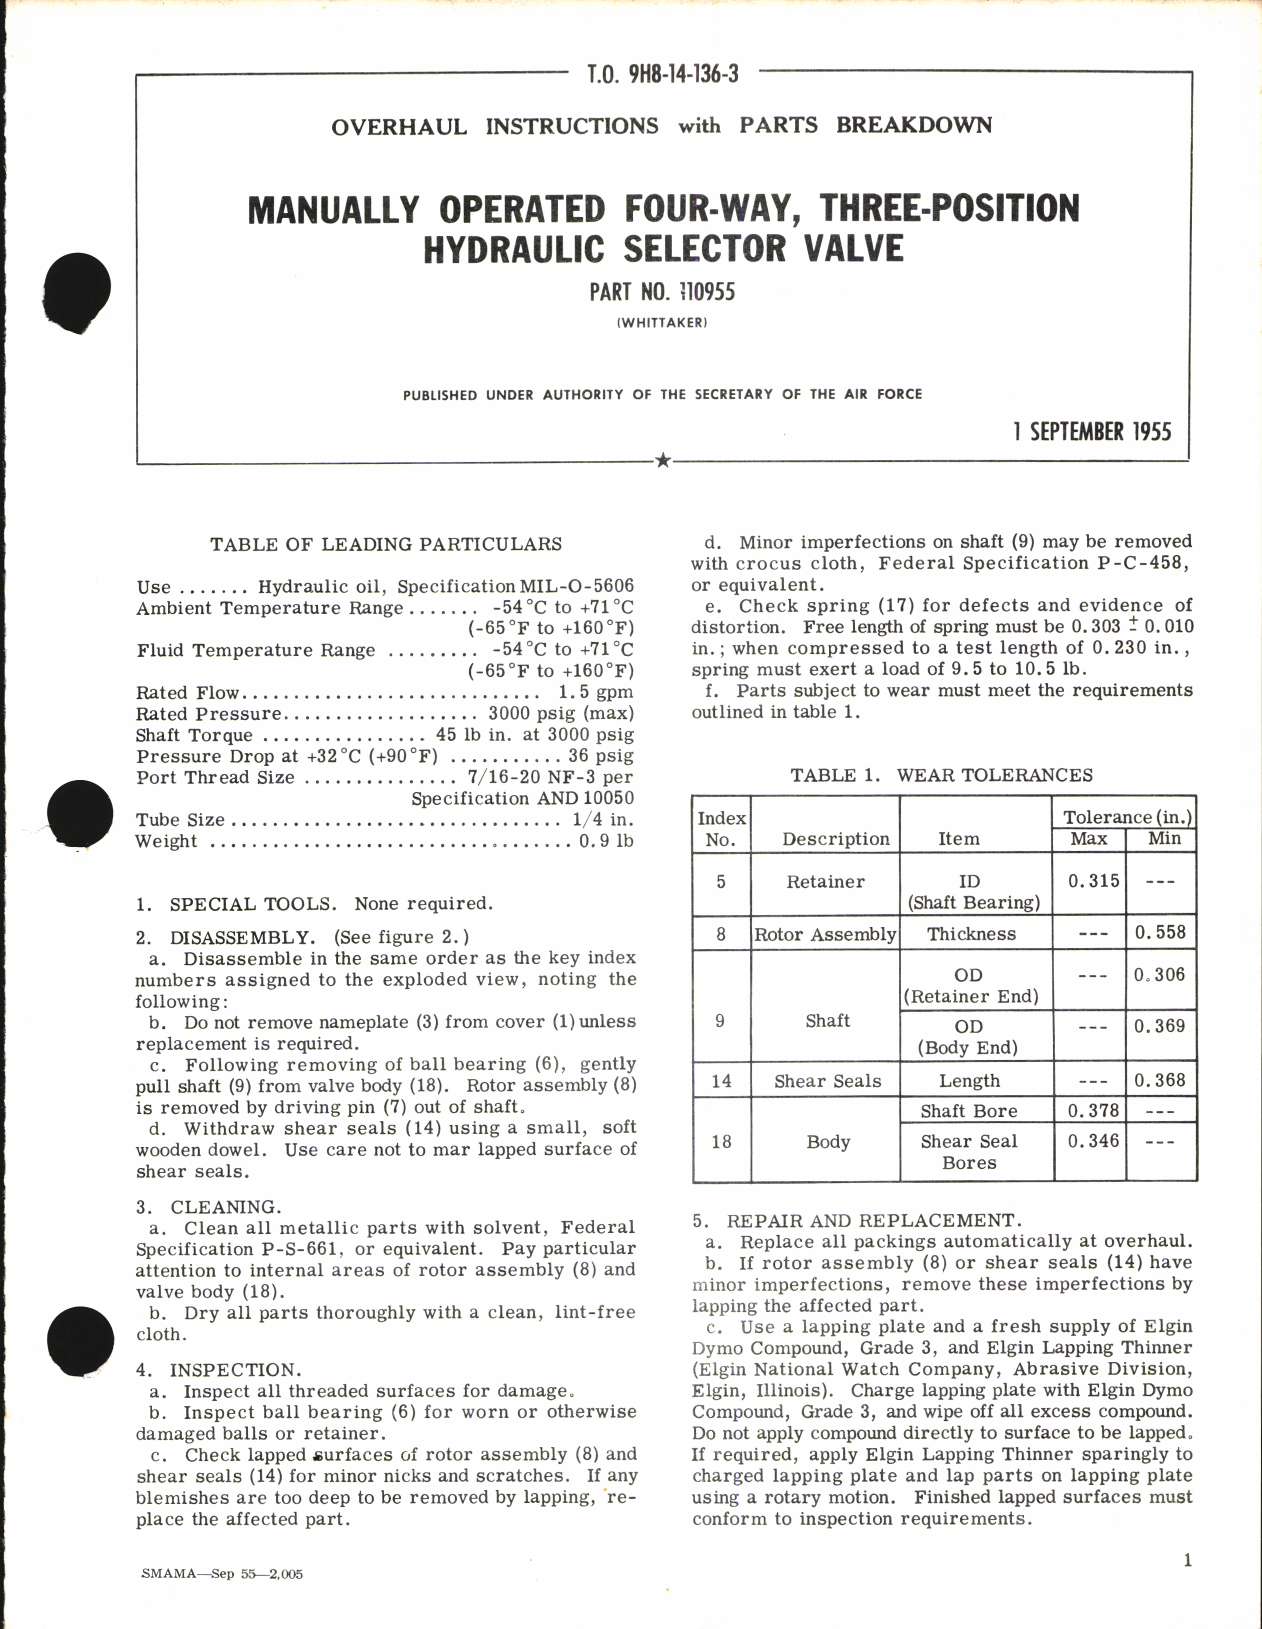 Sample page 1 from AirCorps Library document: Overhaul Instructions with Parts Breakdown for Manually Operated Four-Way, Three-Position Hydraulic Selector Valve Part No. 110955